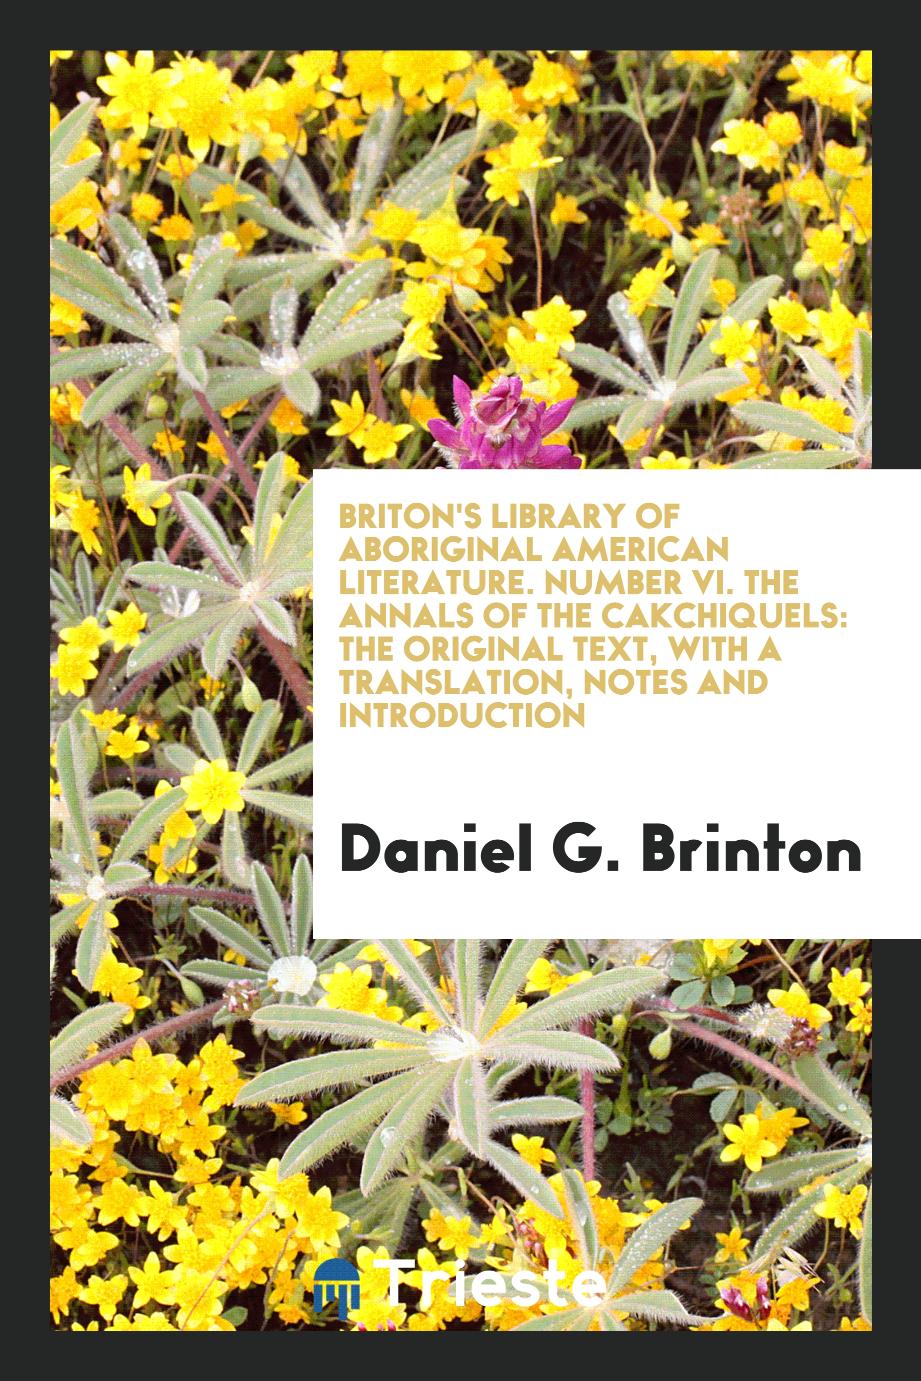 Briton's library of Aboriginal American Literature. Number VI. The annals of the Cakchiquels: the original text, with a translation, notes and introduction